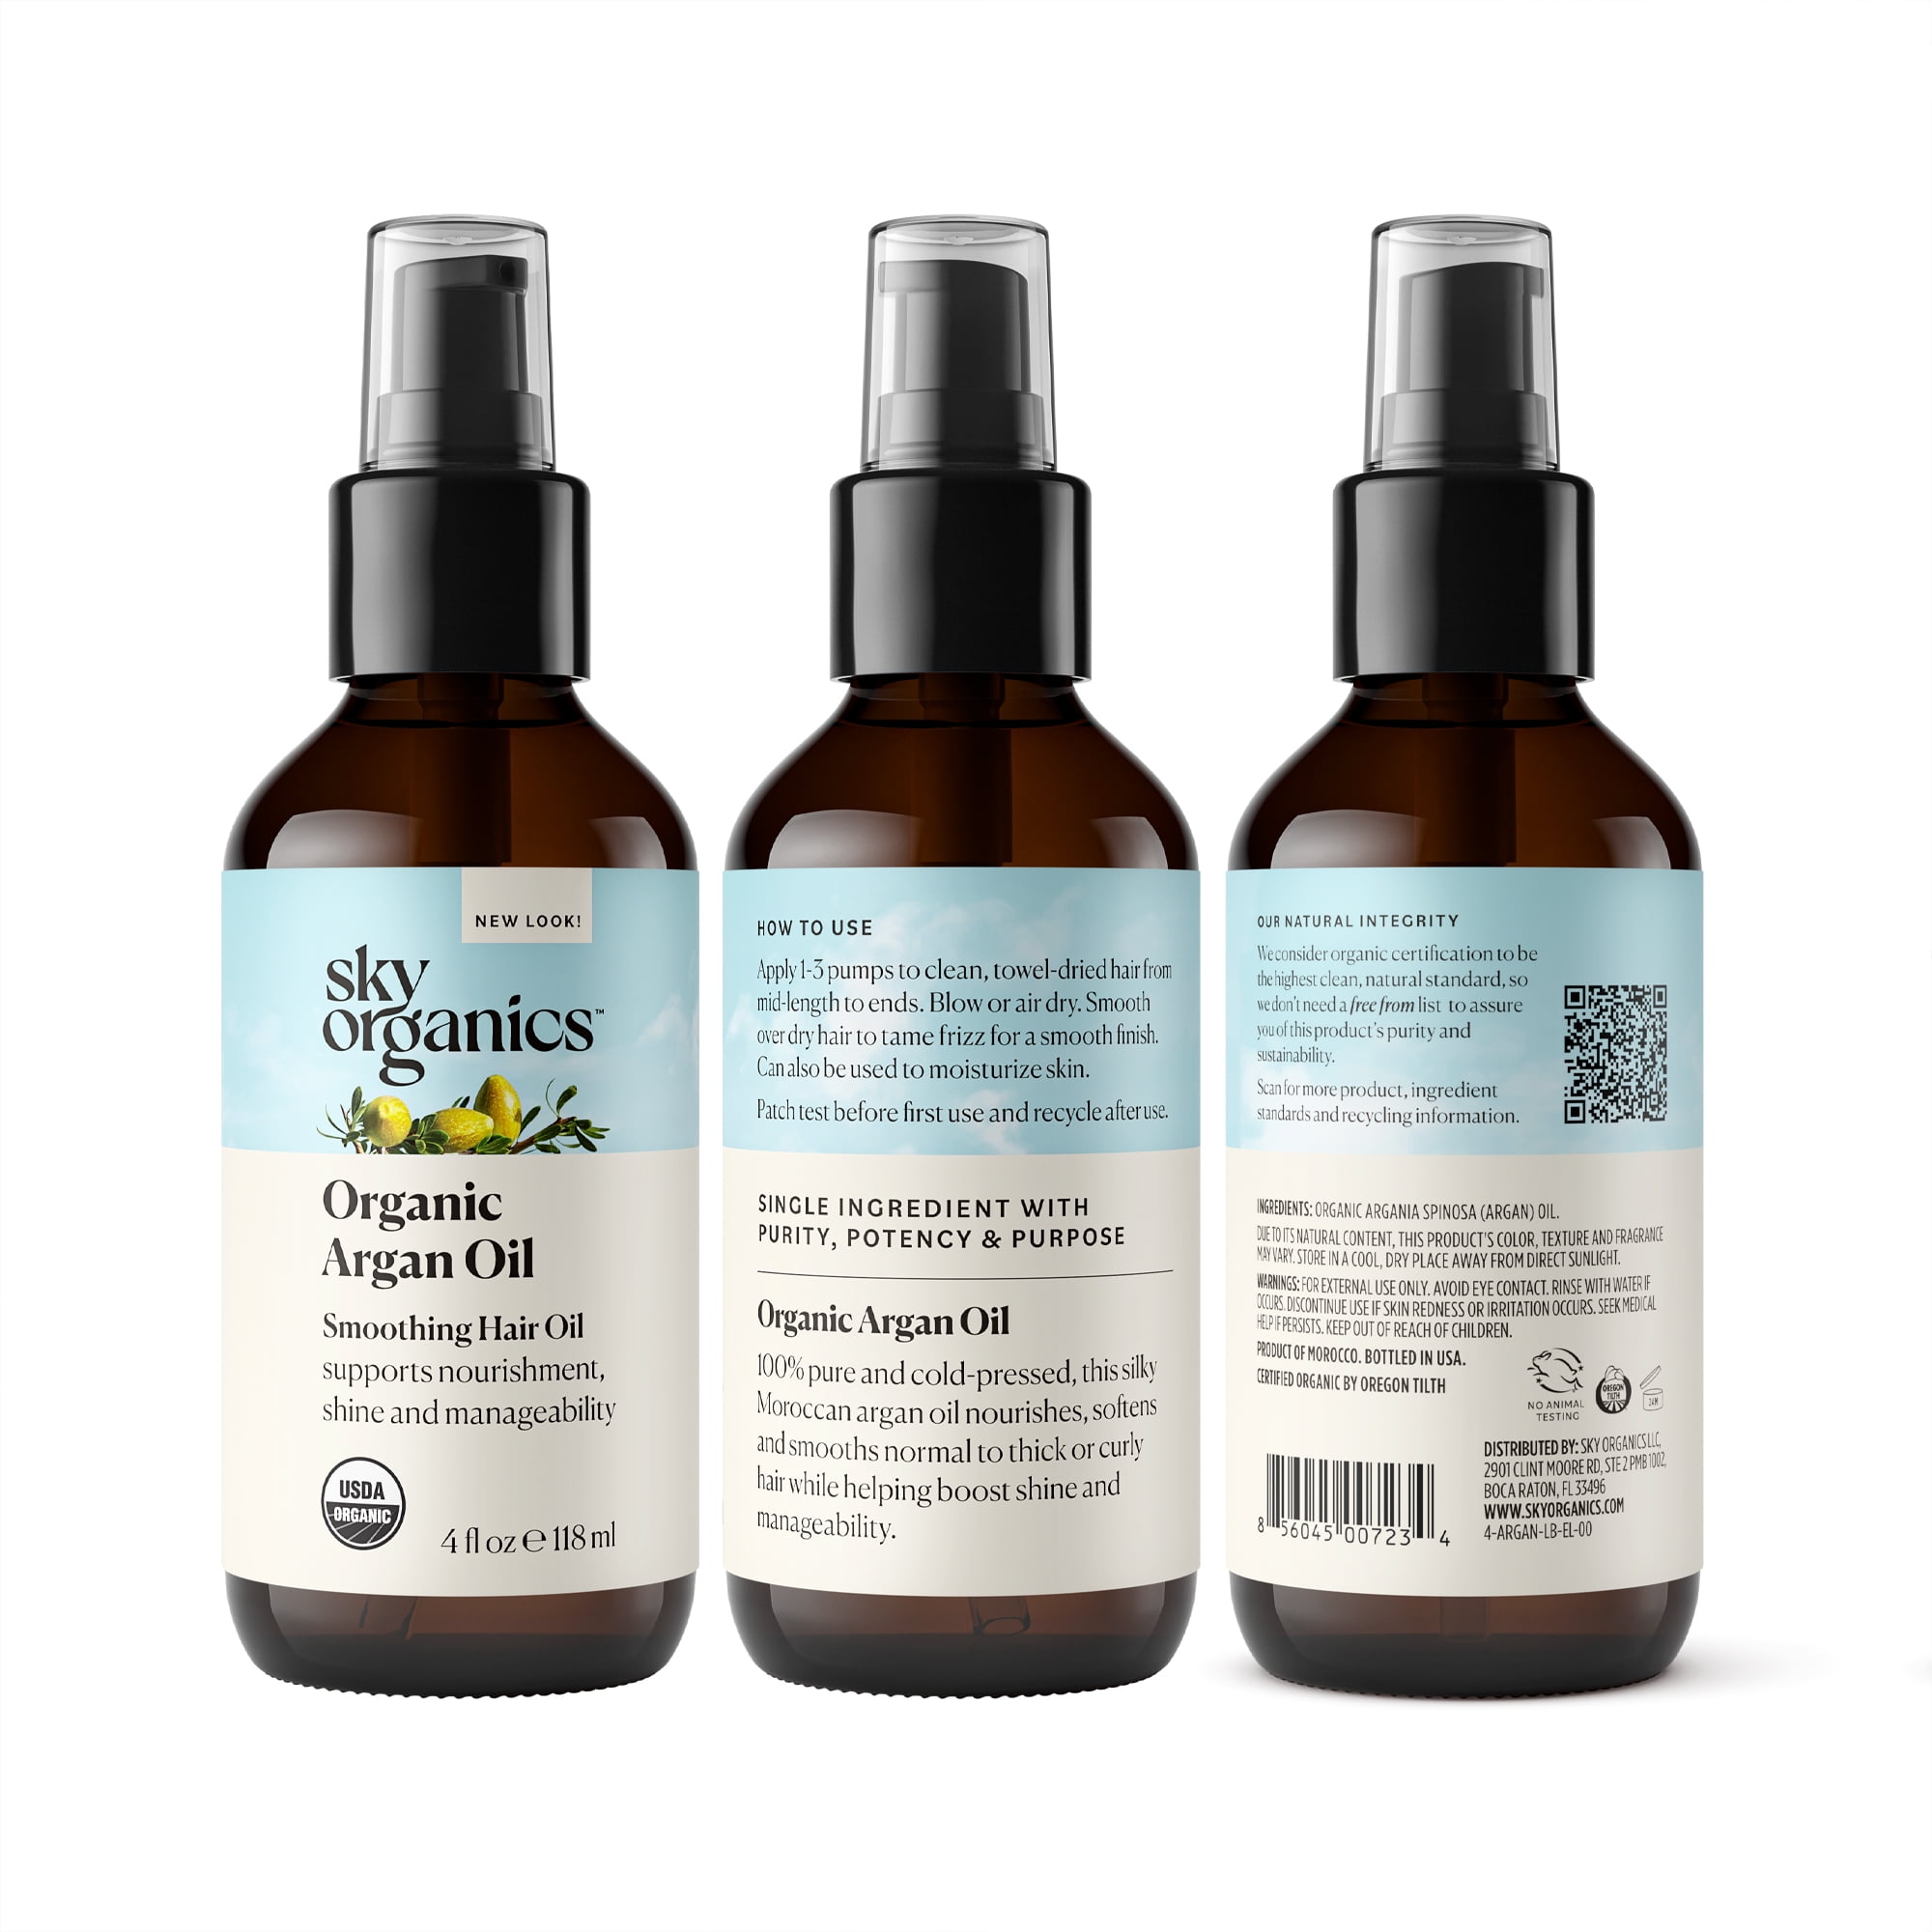 Vegan & Affordable Curly Hair Products from Sky Organics